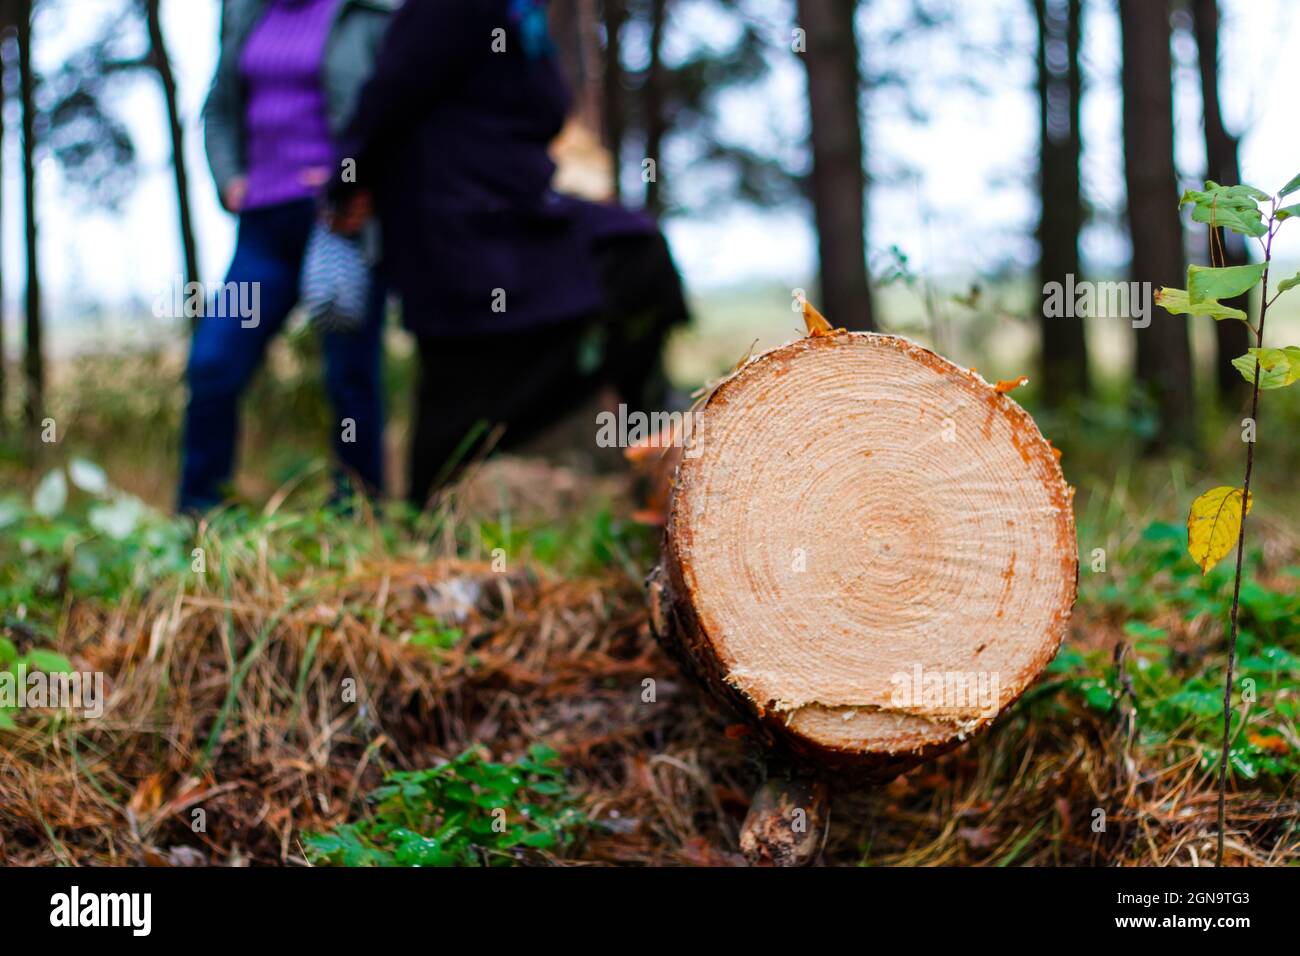 Defocus log of pine tree in autumn forest. Saw cur wood. Saw cut of a large pine tree. Nature wood outside, outdoor. People silhouettes on background Stock Photo